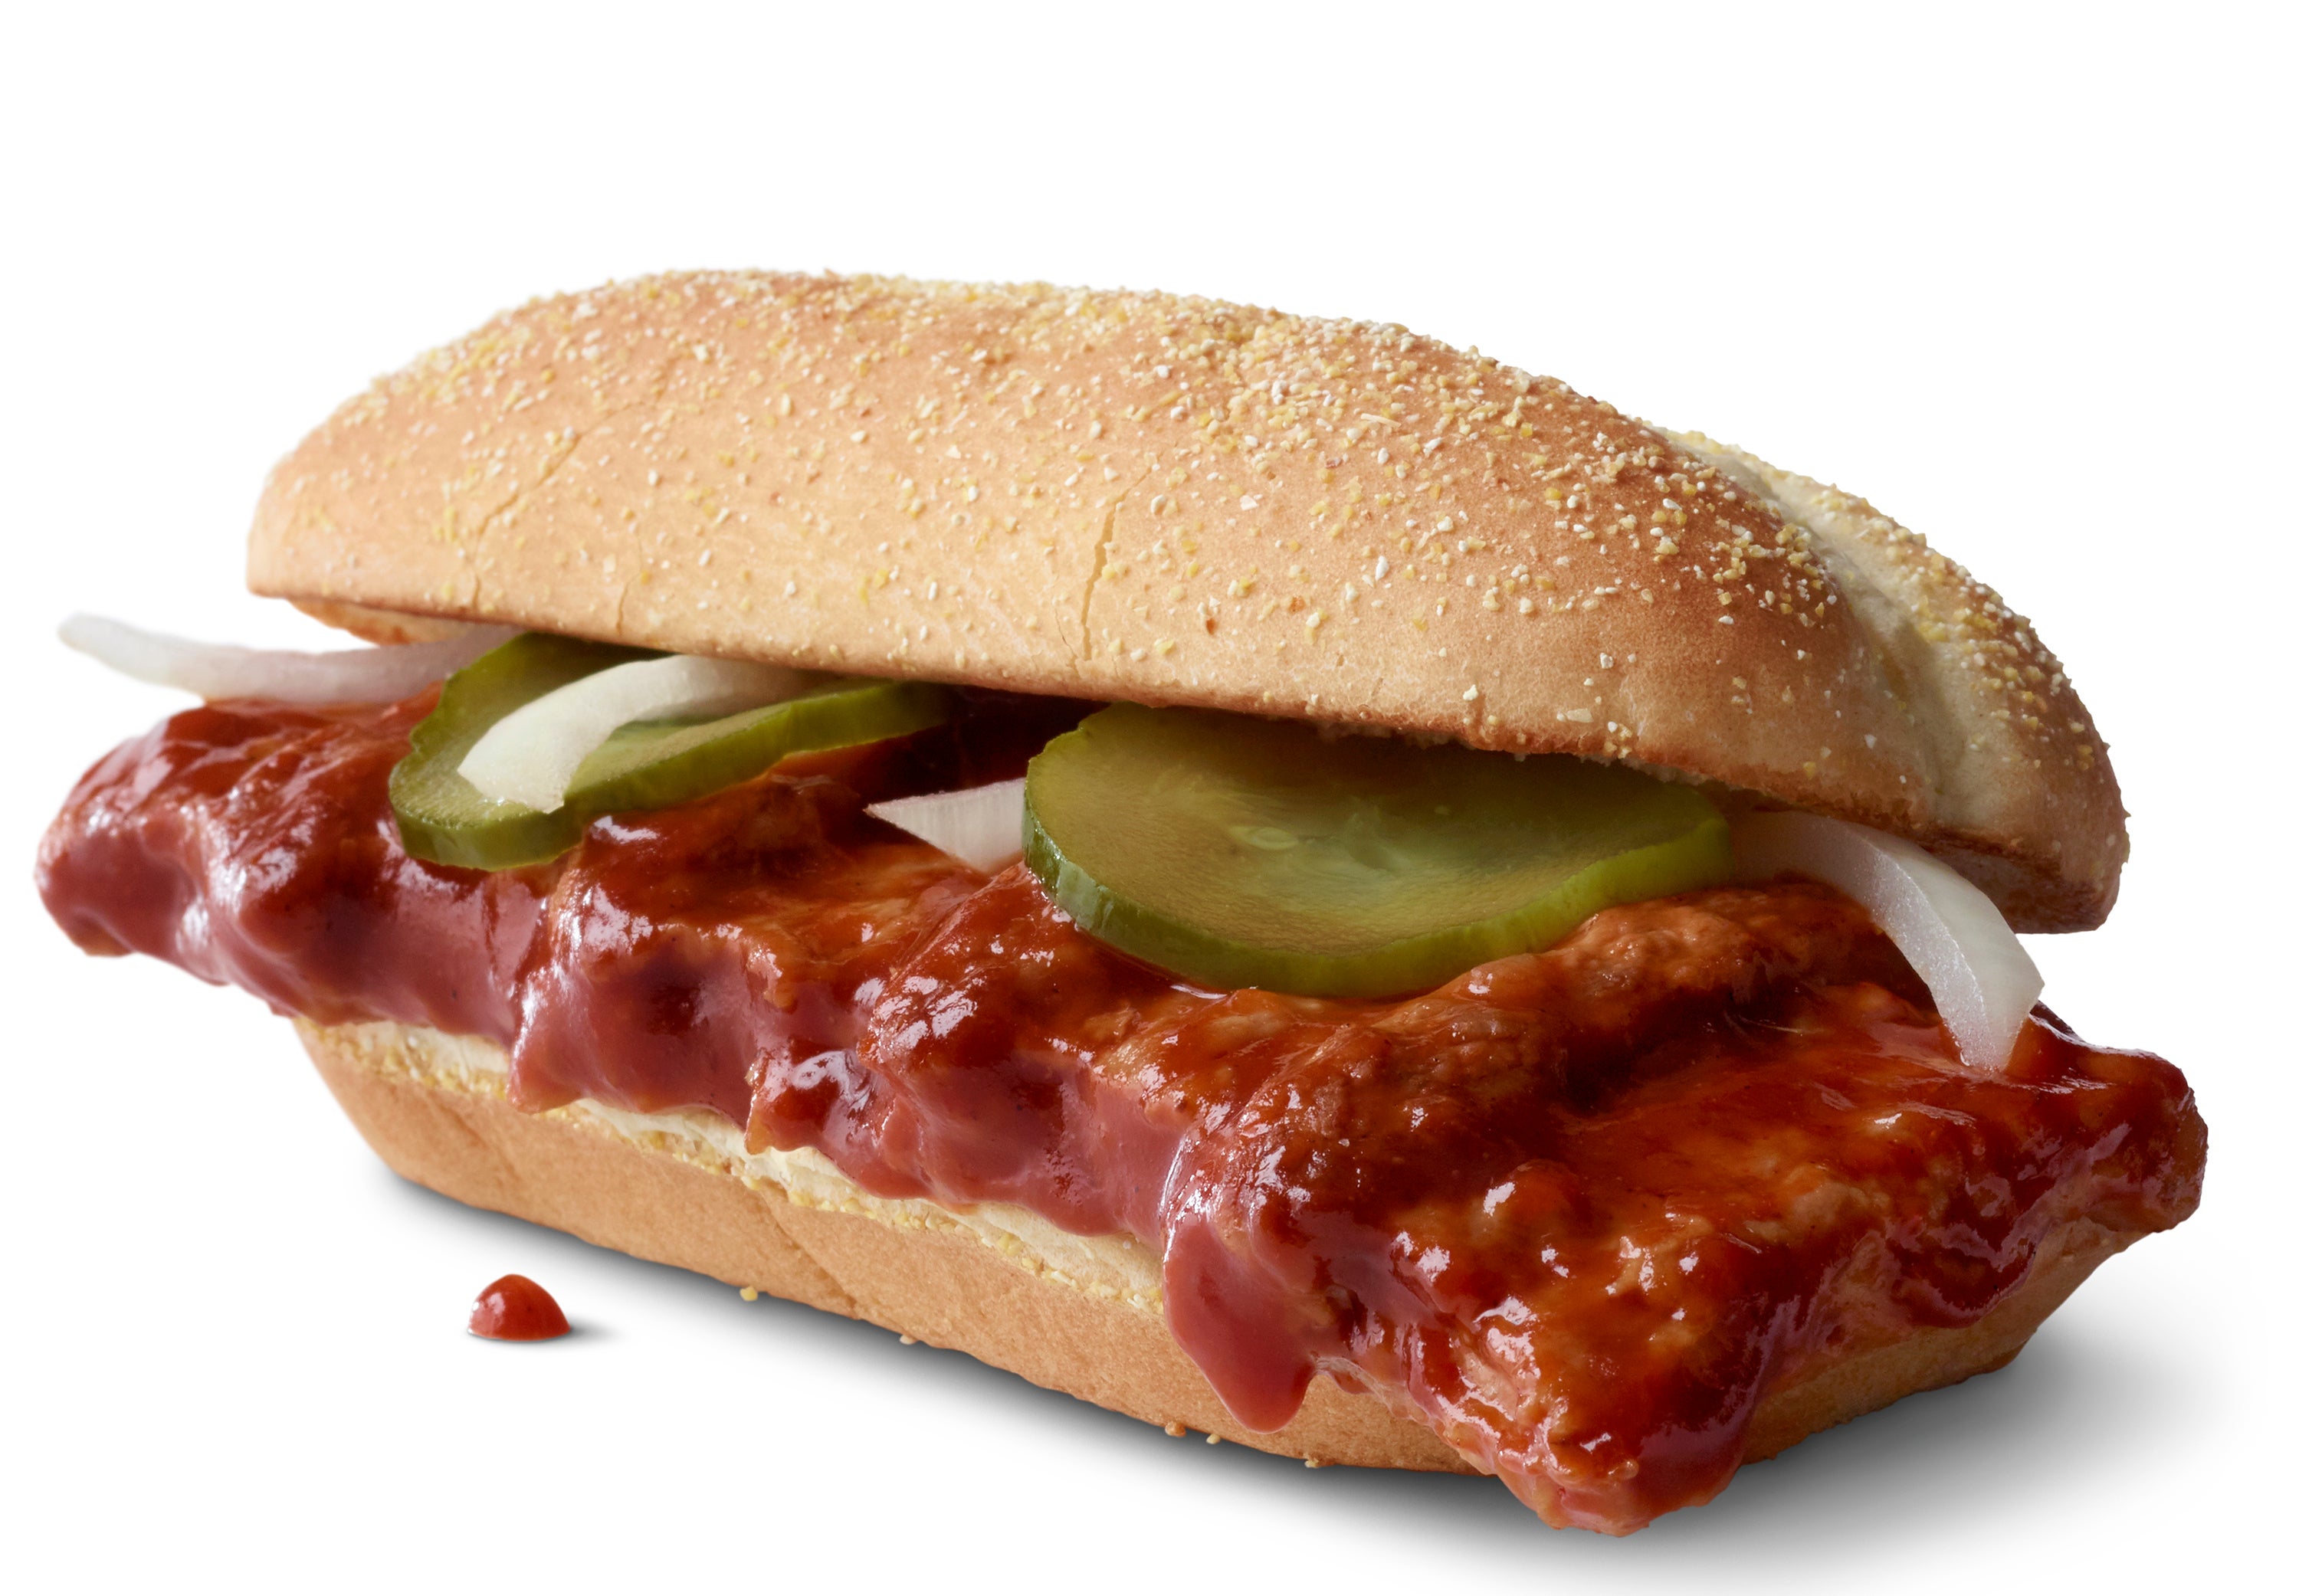 McDonald’s cult classic, the McRib, is coming back in 2020 The